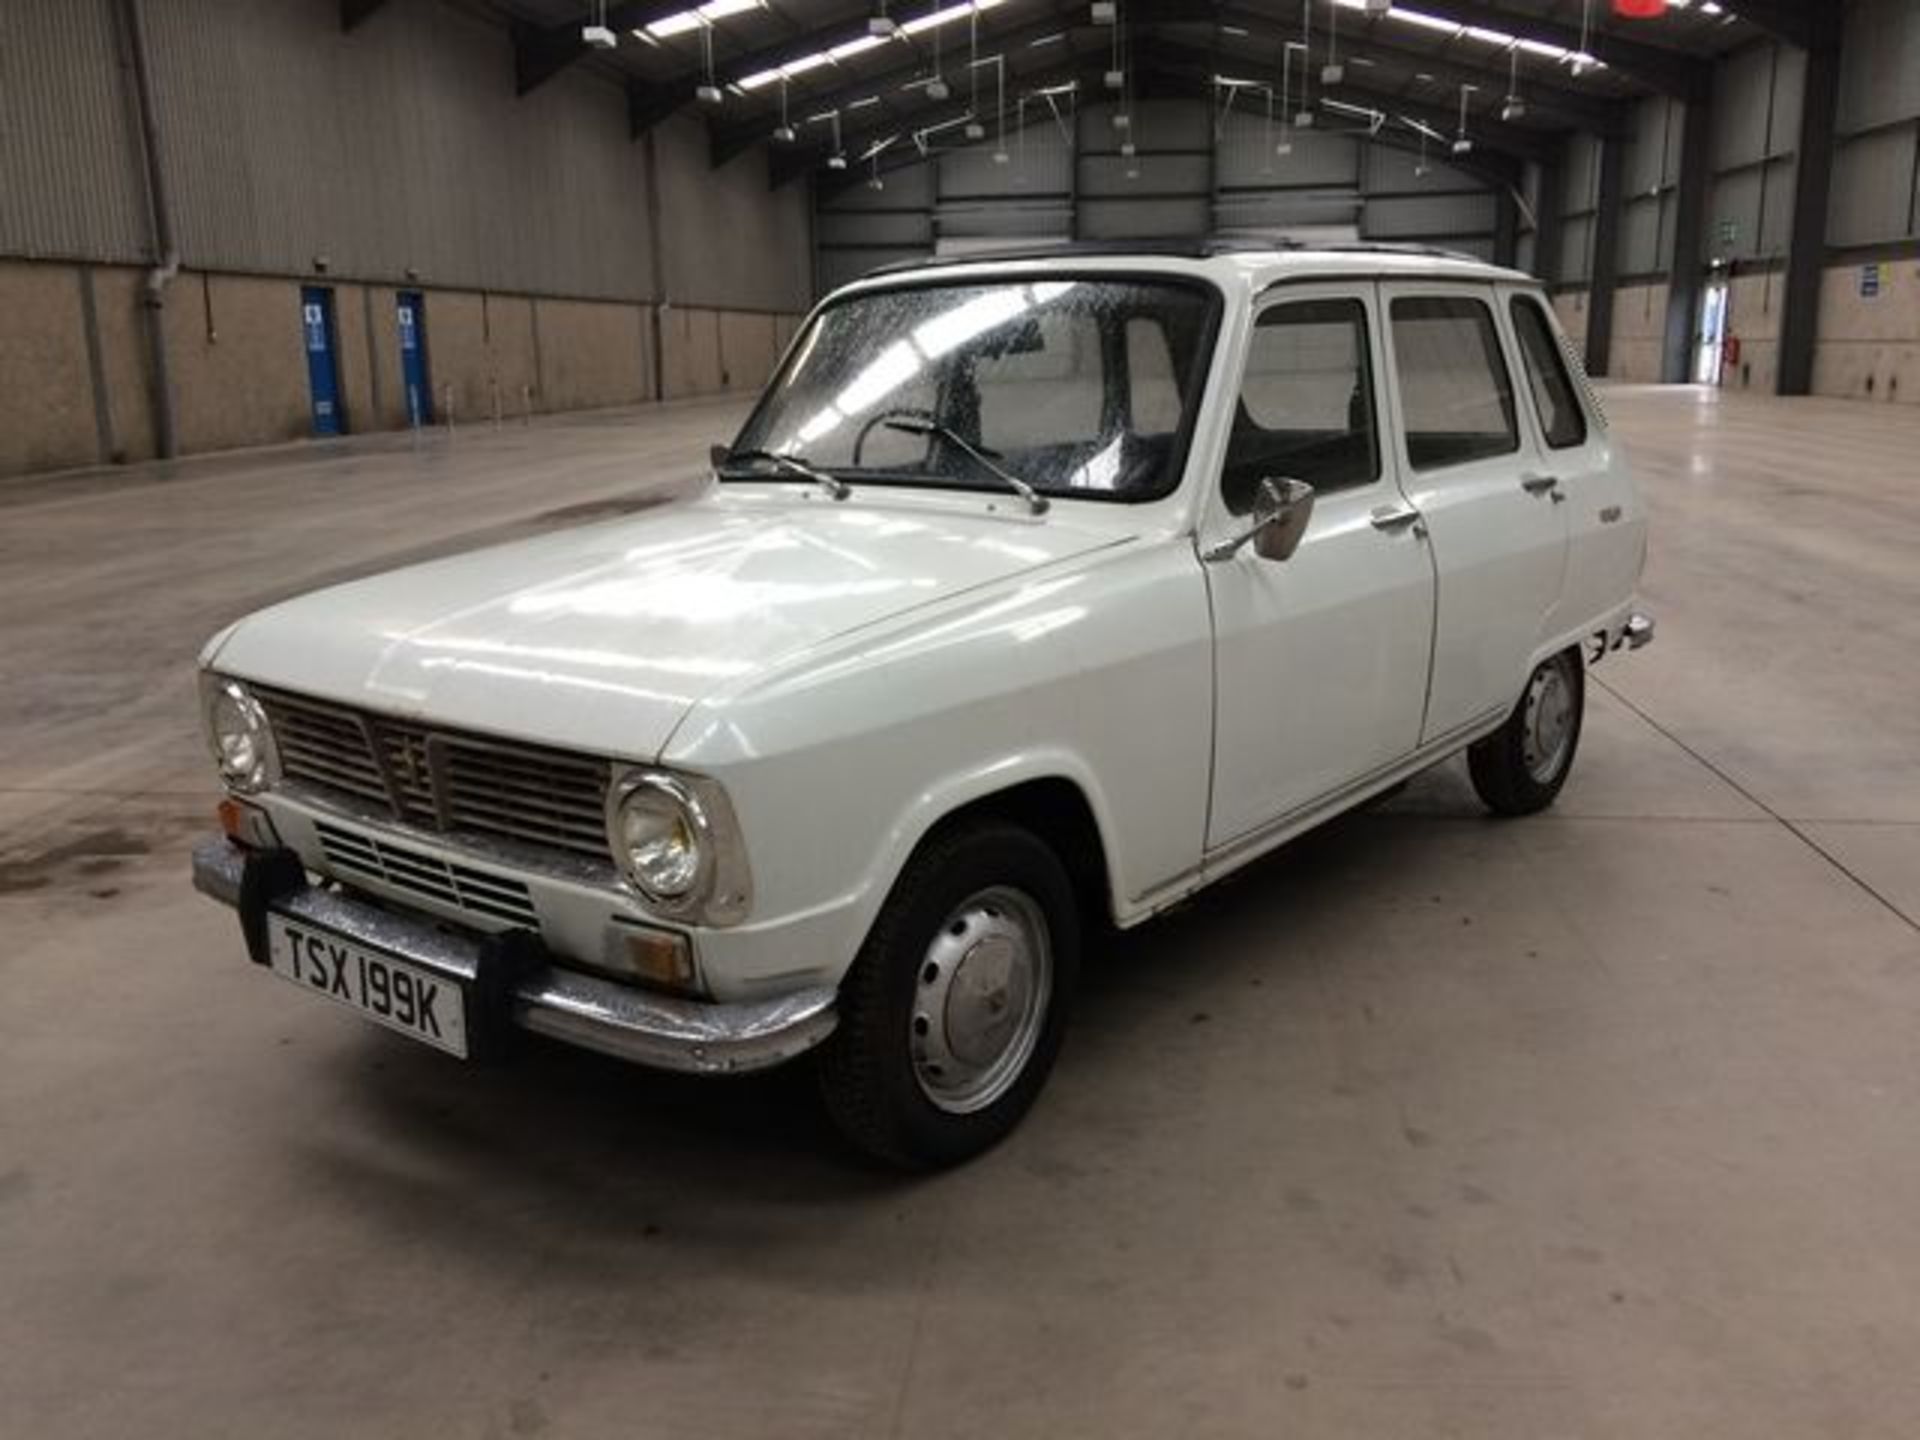 RENAULT 6 TL - 1108cc - Image 10 of 17